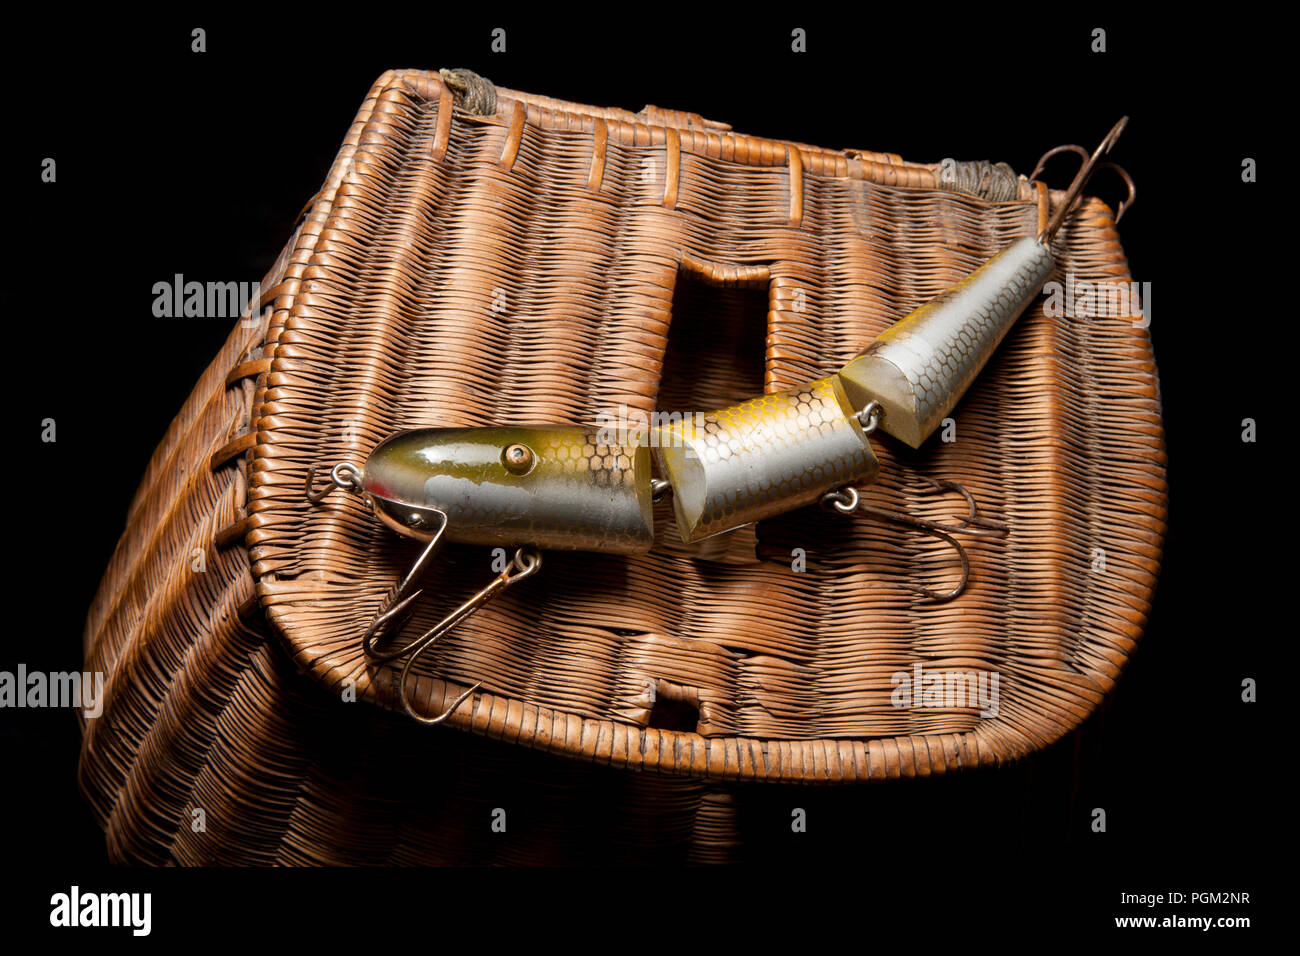 A large, jointed fishing lure, or plug, equipped with treble hooks and displayed on an old whicker fishing creel. From a collection of fishing tackle  Stock Photo